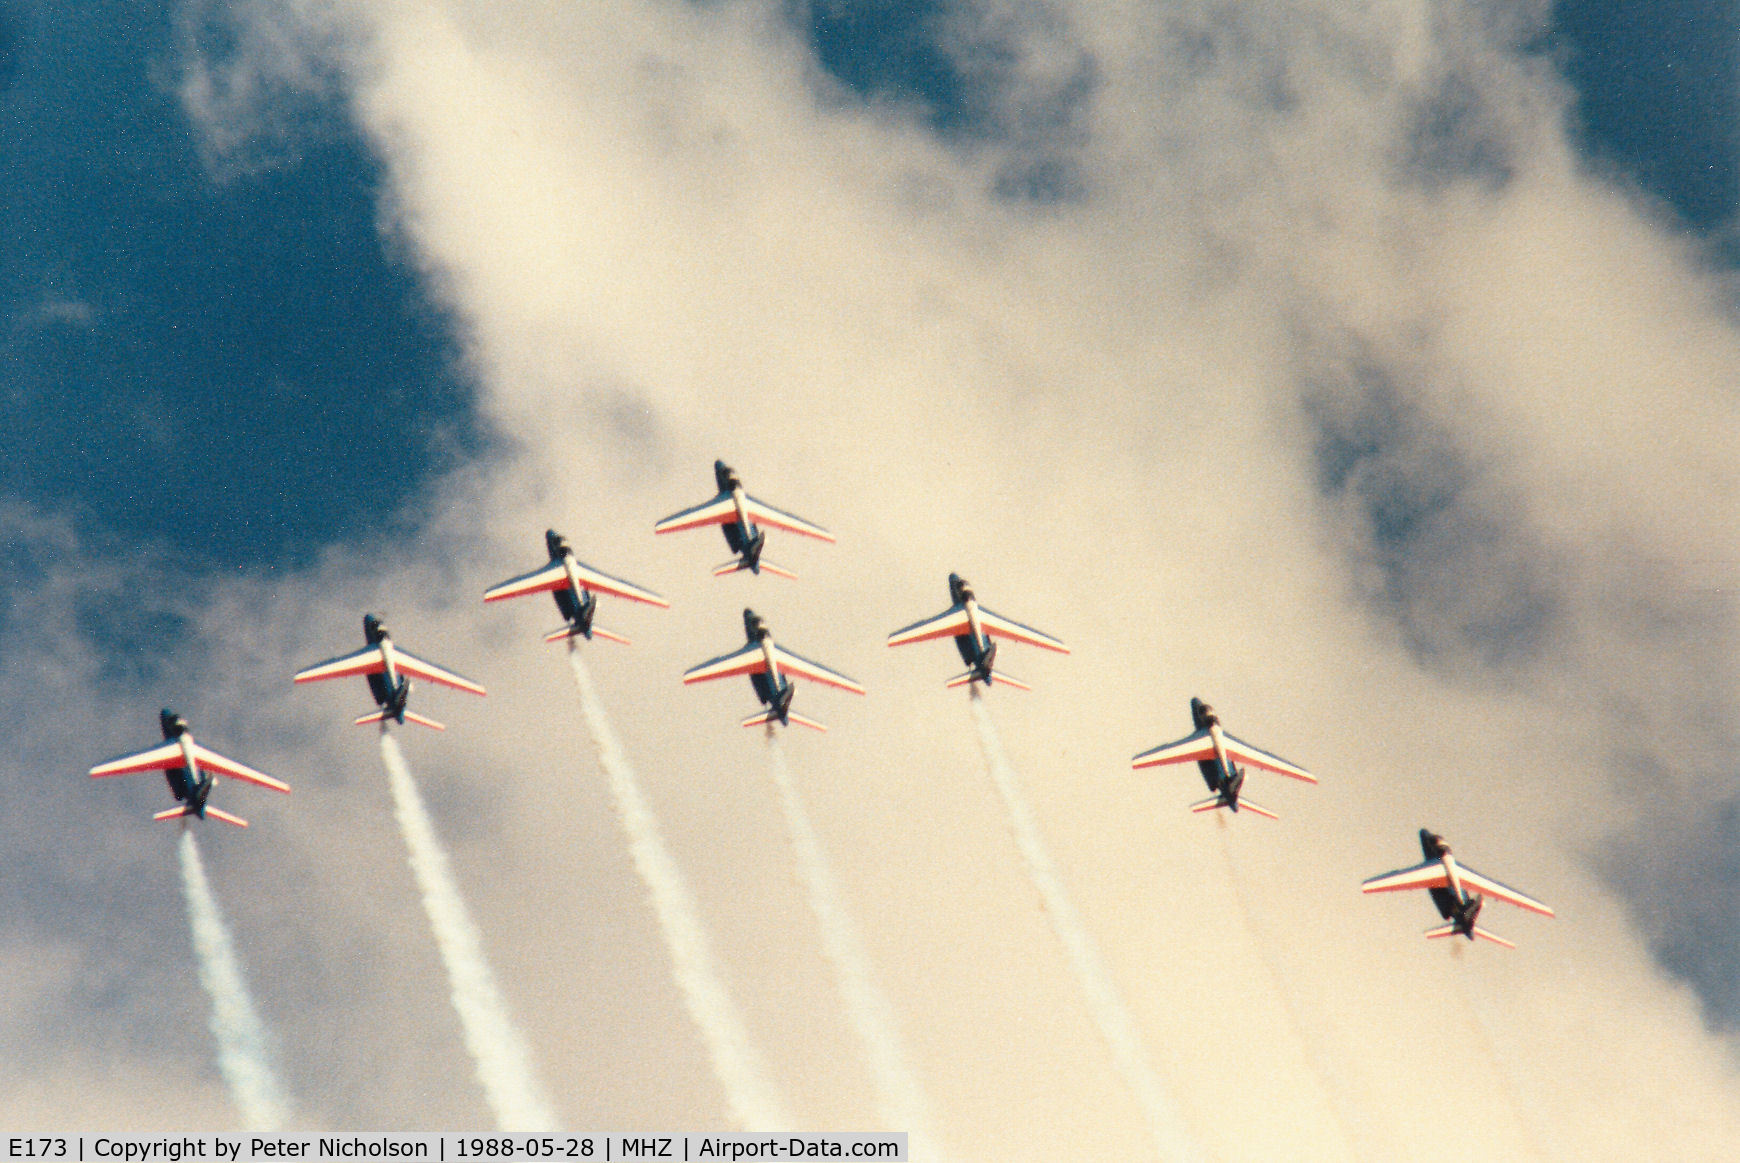 E173, Dassault-Dornier Alpha Jet E C/N E173, Lead aircraft of the Patrouille de France aerobatic display team in action at the 1988 RAF Mildenhall Air Fete.